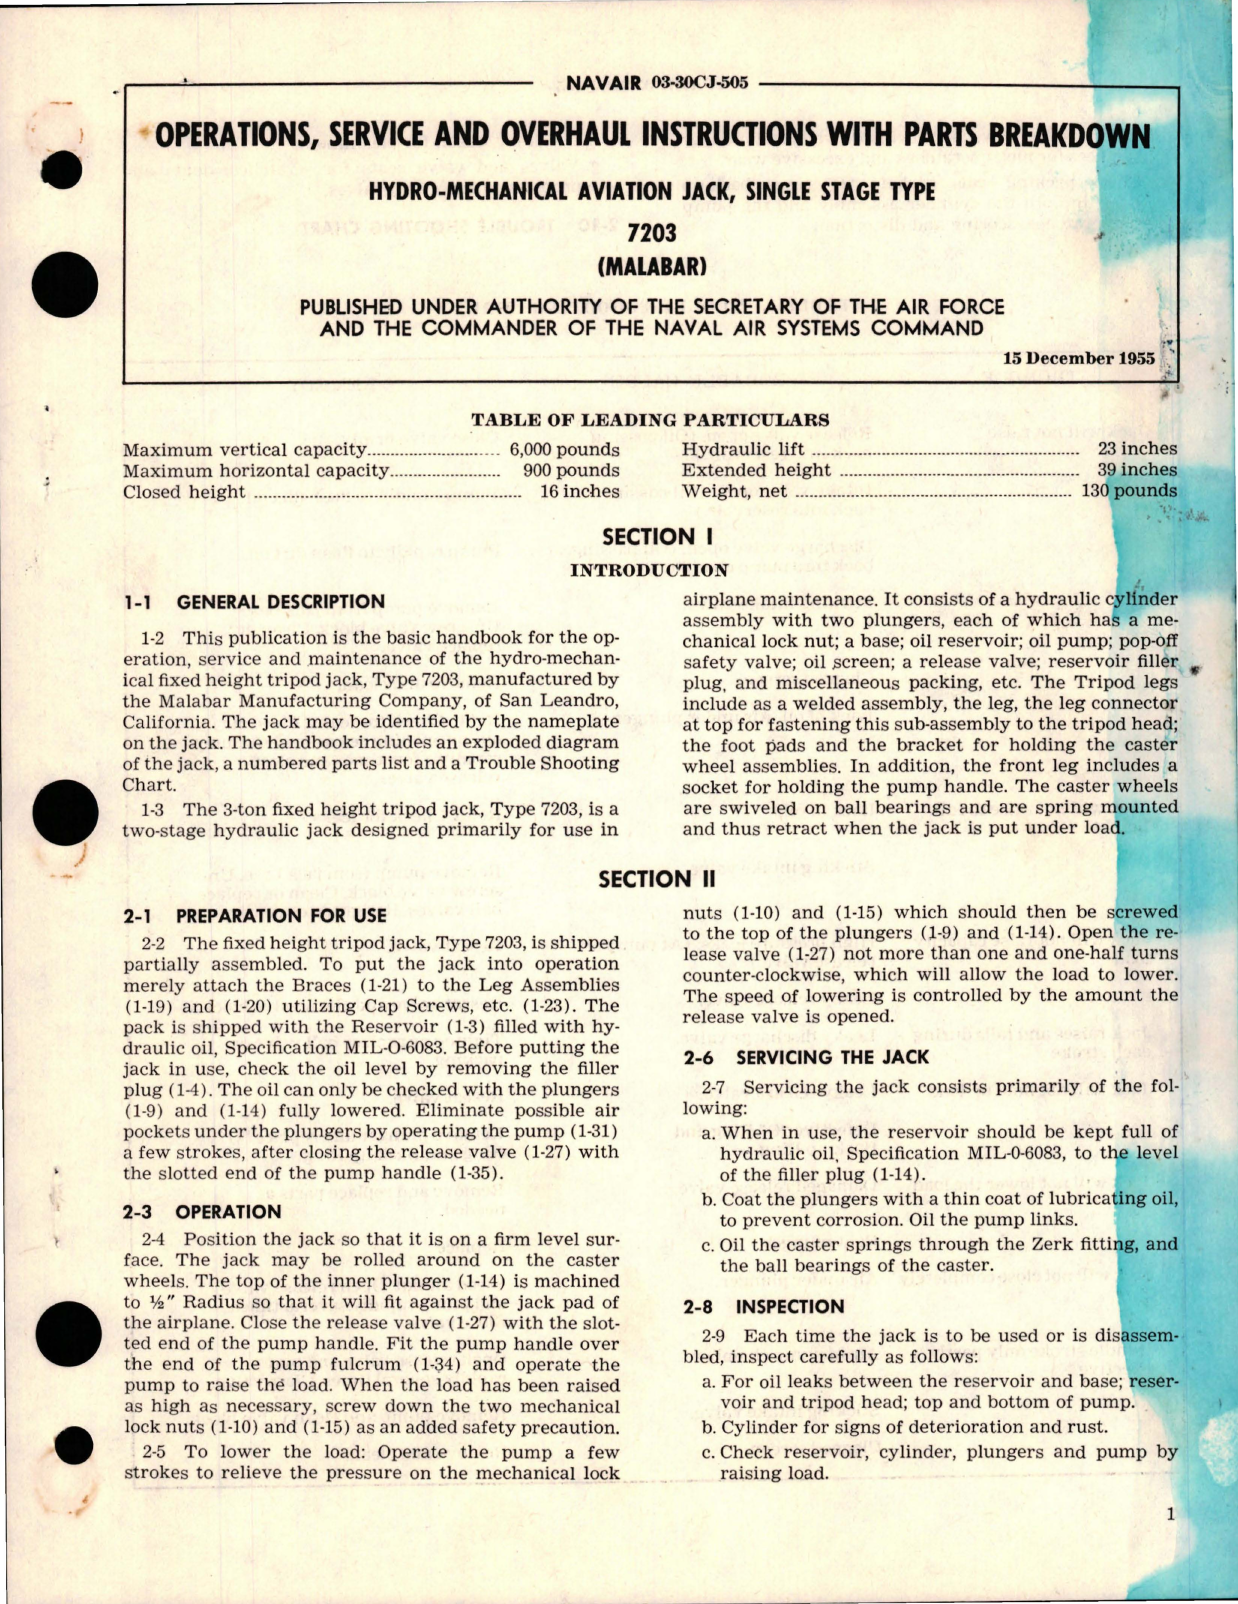 Sample page 1 from AirCorps Library document: Operations, Service and Overhaul Instructions with Parts for Single Stage Type Hydro Mechanical Aviation Jack - 7203